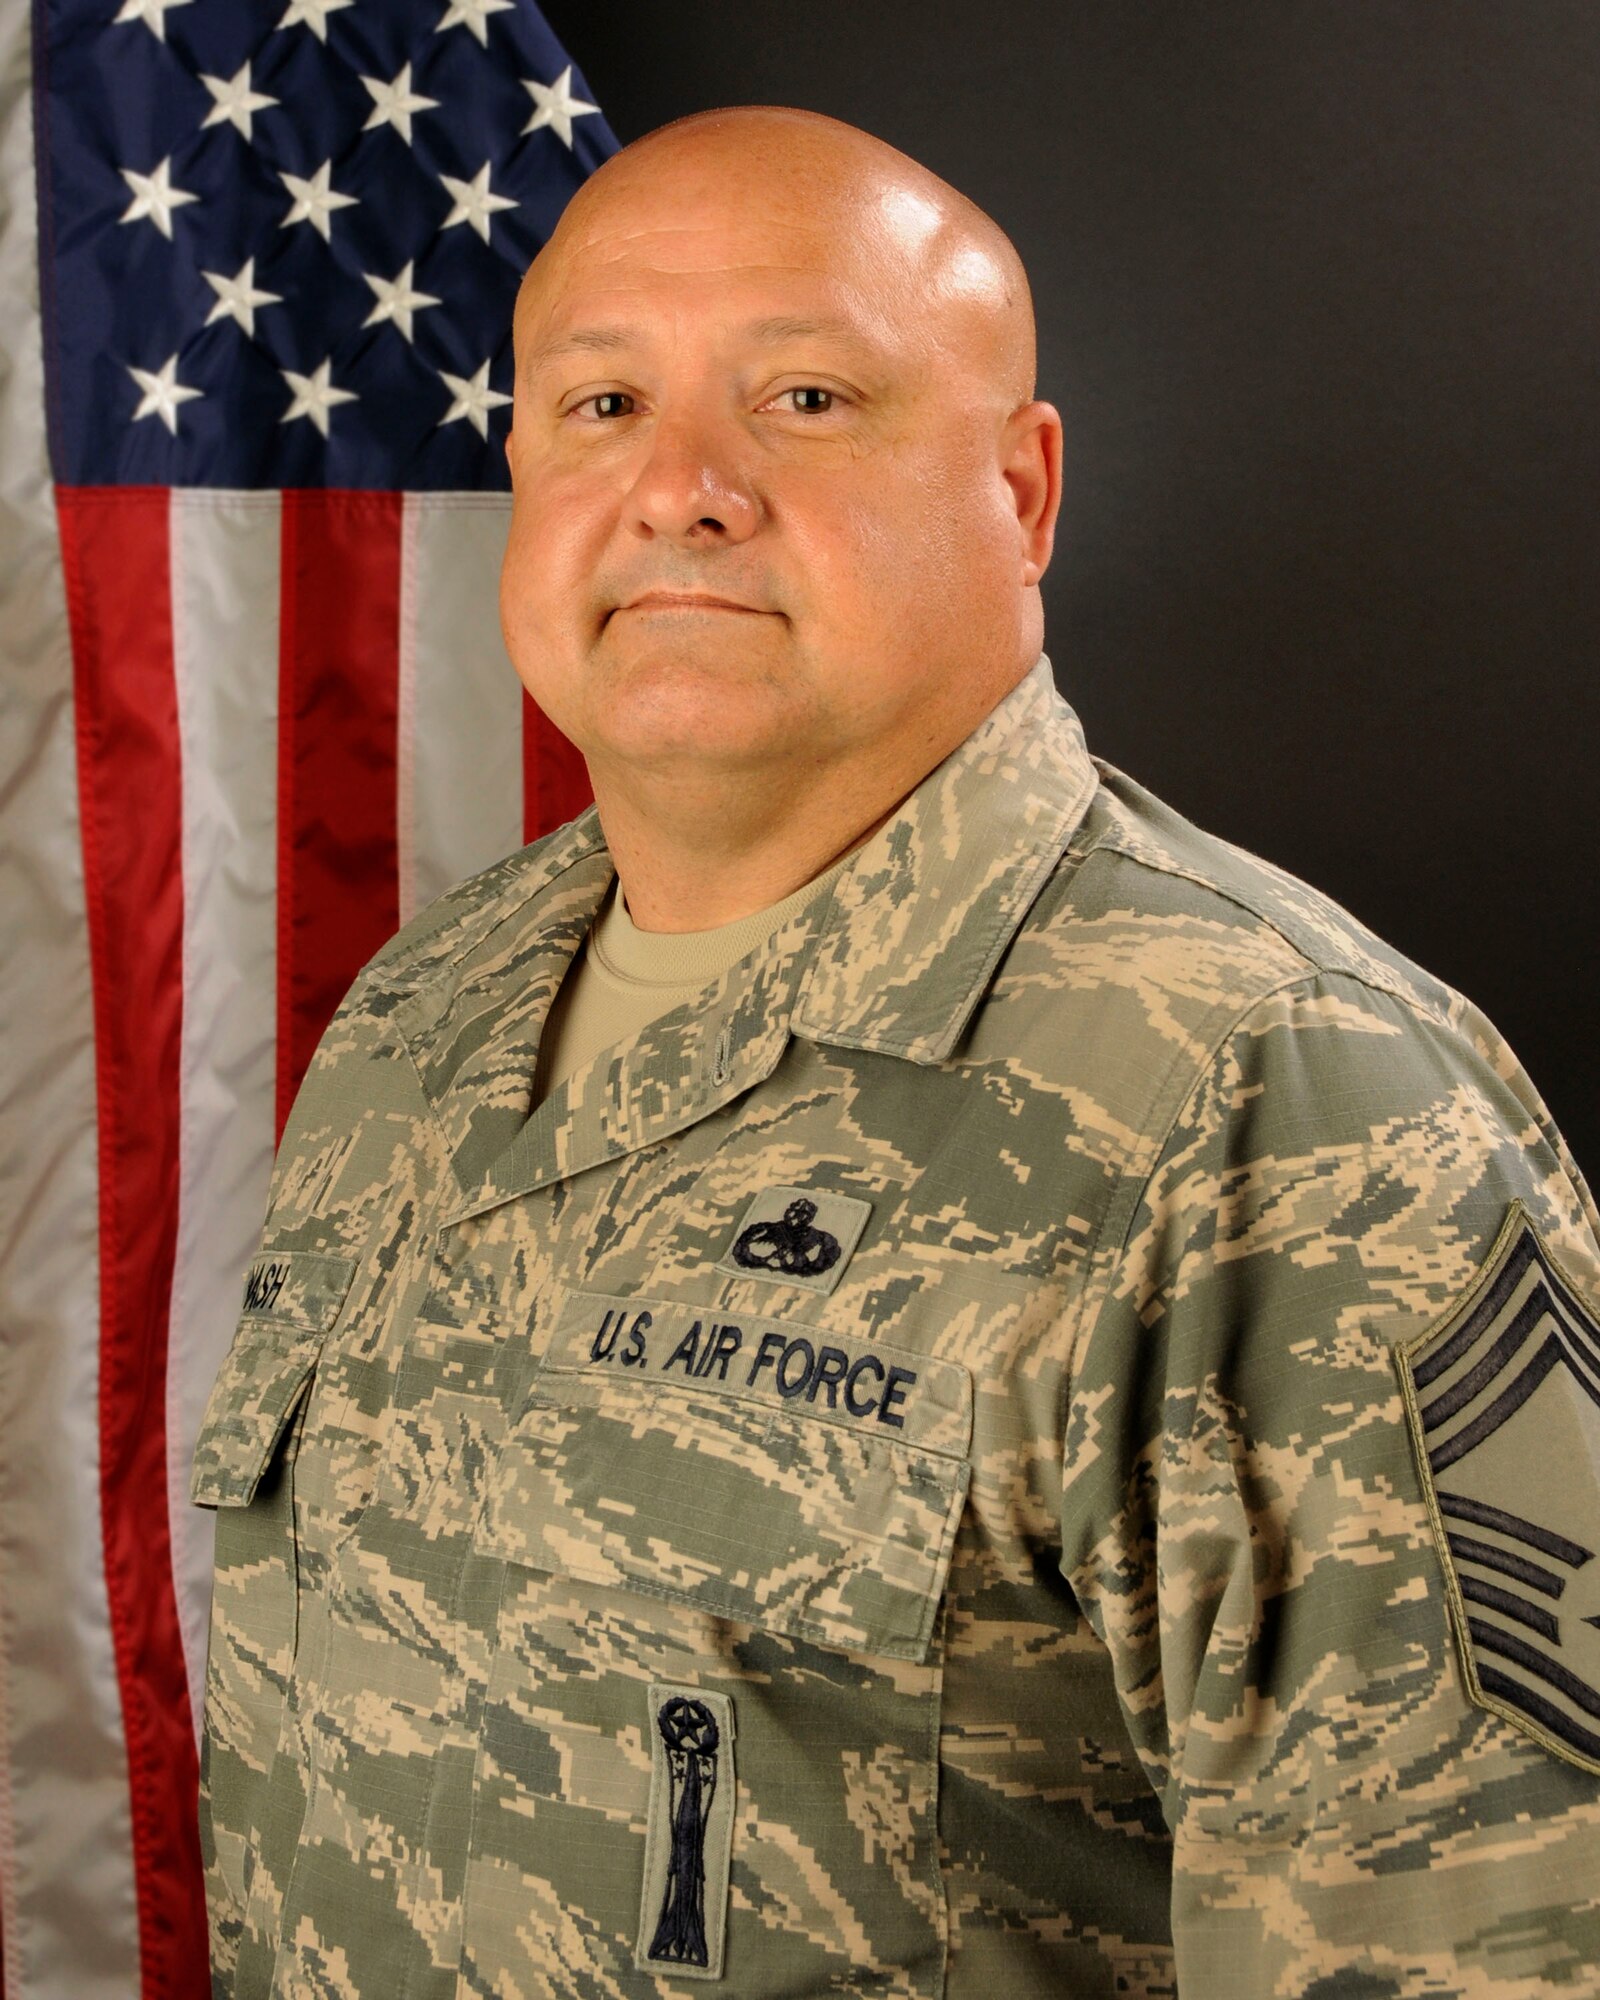 U.S. Air Force Chief Master Sgt. Harold Nash, from the 169th Maintenance Squadron at McEntire Joint National Guard Base, S.C., June 13, 2014. (U.S. Air National Guard photo by Senior Master Sgt. Edward Snyder/Released)